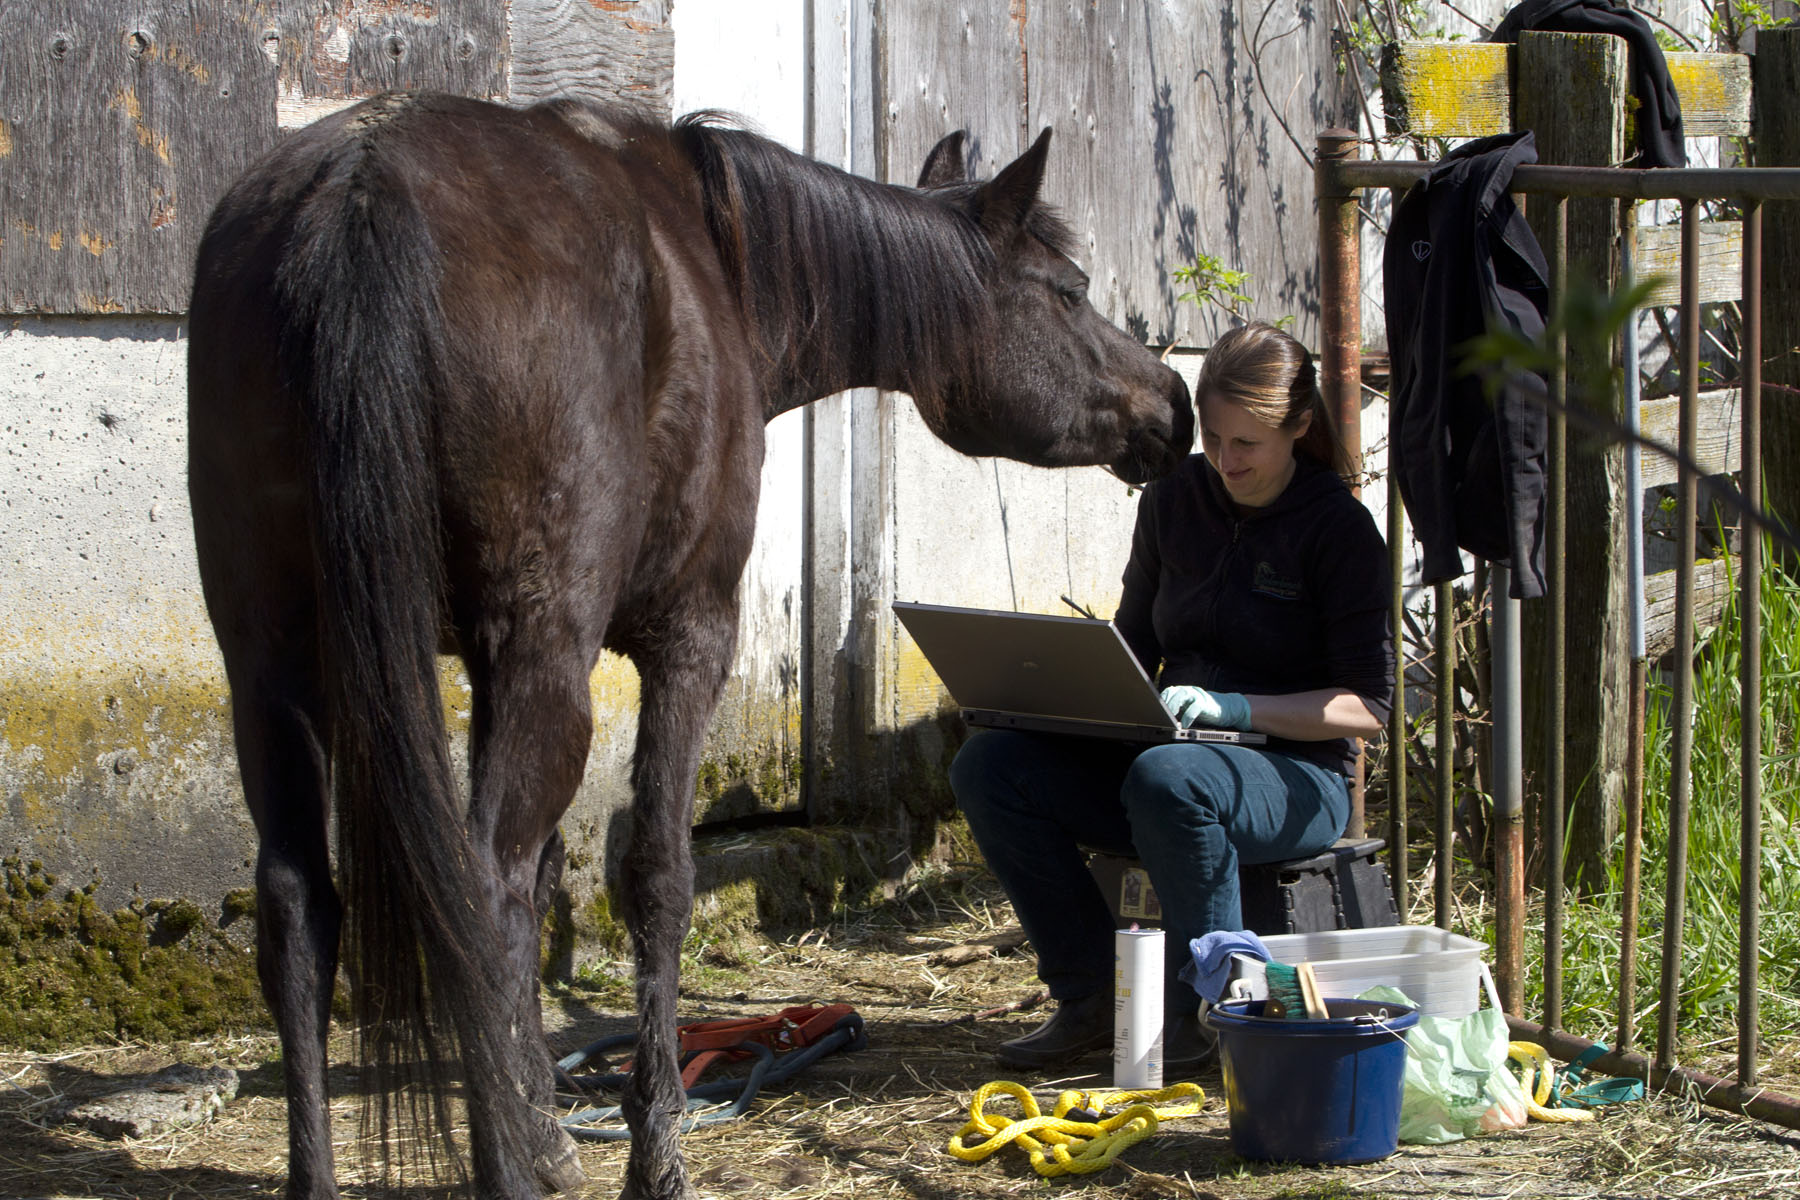 Hannah Mueller, DVM, co-founder and vice president of the Northwest Equine Stewardship Center and practice owner of Cedarbrook Veterinary Care creates records of horses on Summer Raffo's farm in Oso, Wash. during a voluntary veterinary visit on April 1, 2014. The 16 horses belong to Summer Raffo, who died in the Oso mudslide on March 22, 2014. Along with help from another vet and volunteers the horses received basic vet care, grooming and were fed fresh hay.